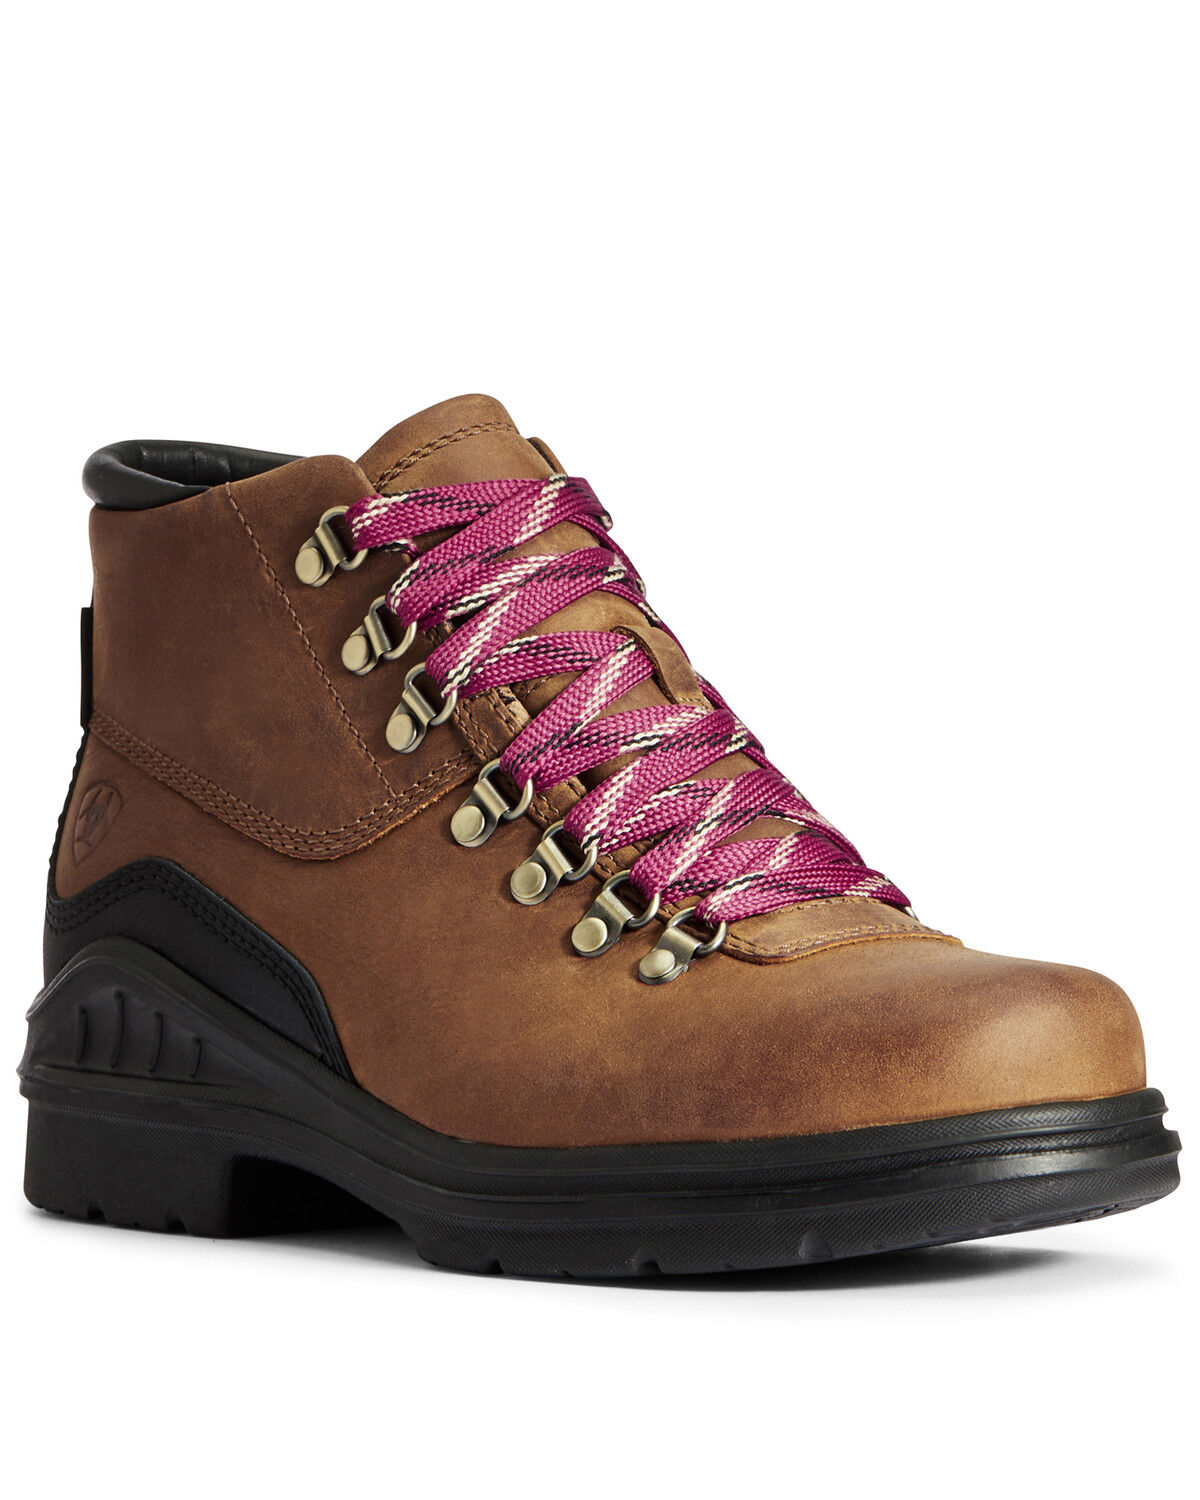 women's lace up ariat boots